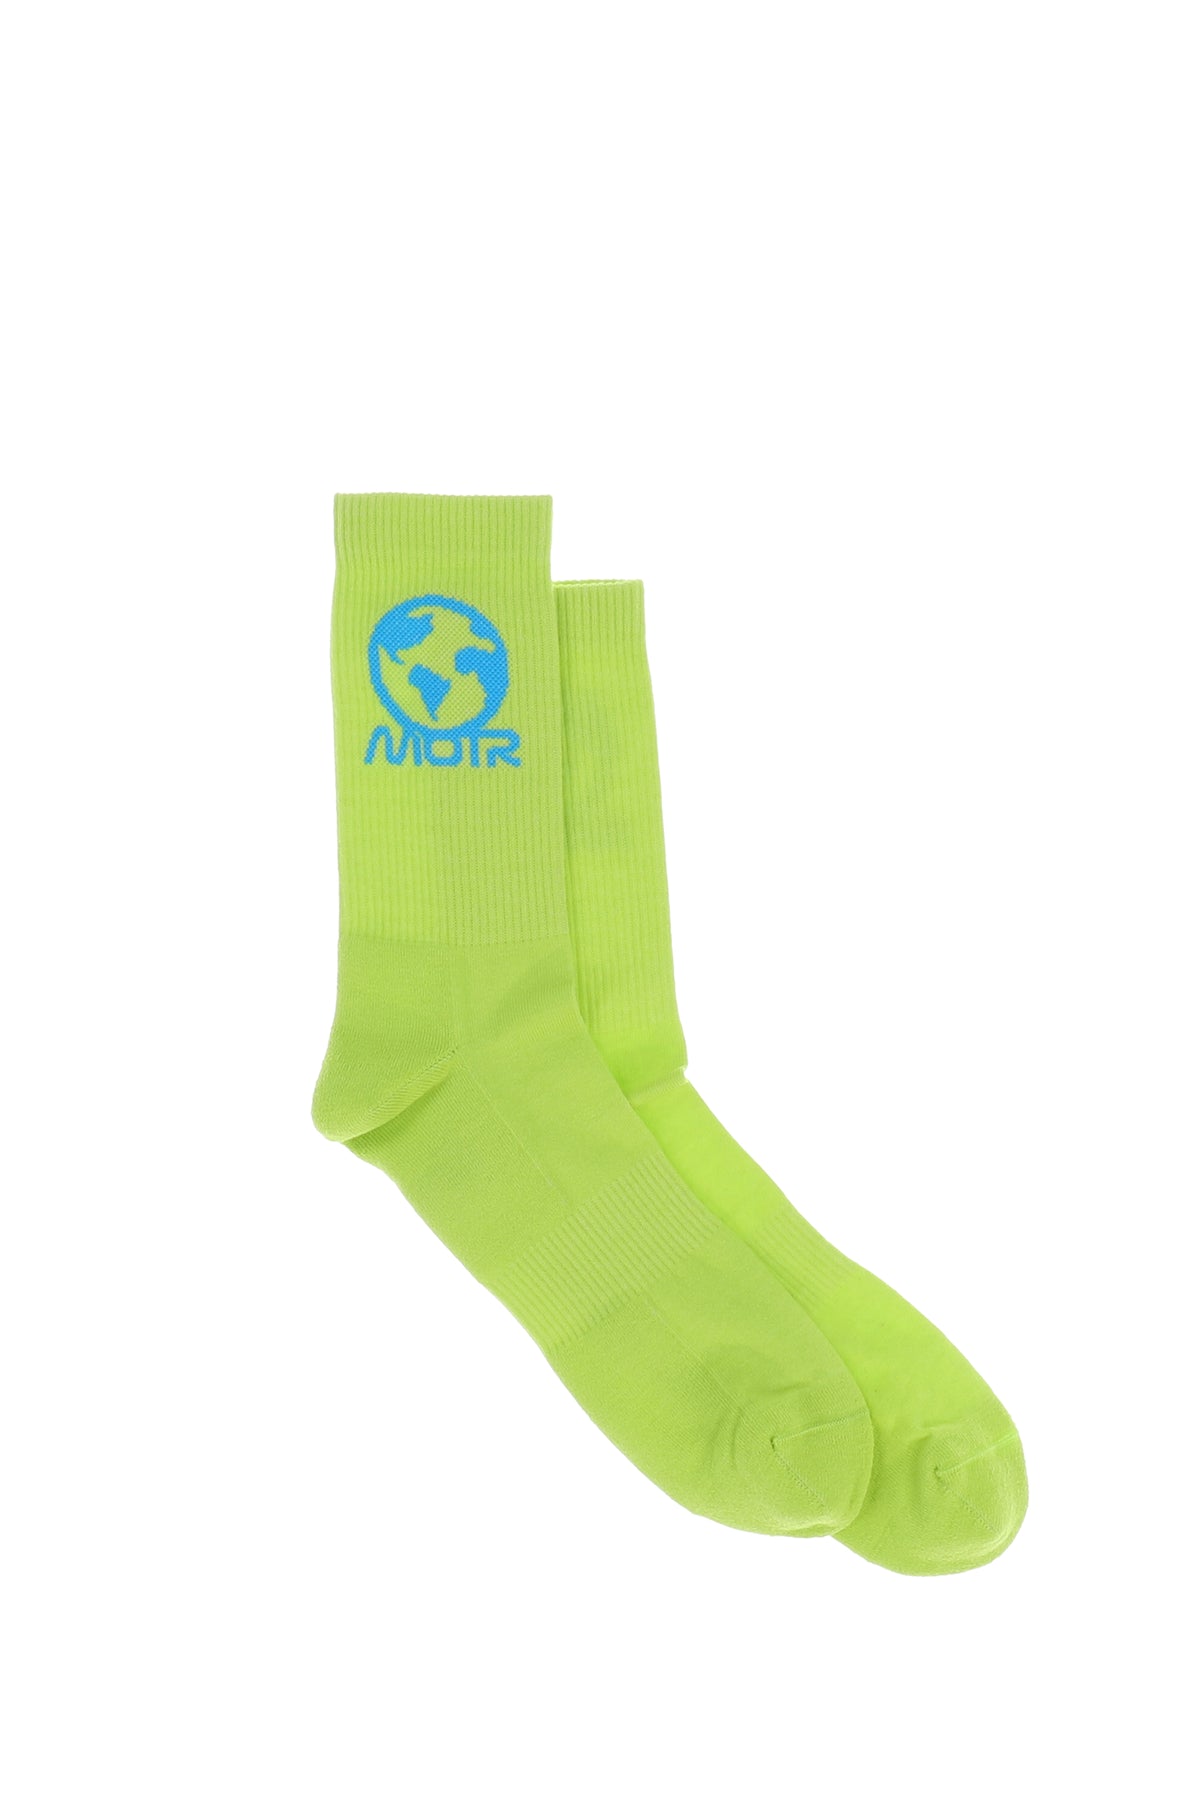 SOCKS / LIME PUNCH/TURQUOISE